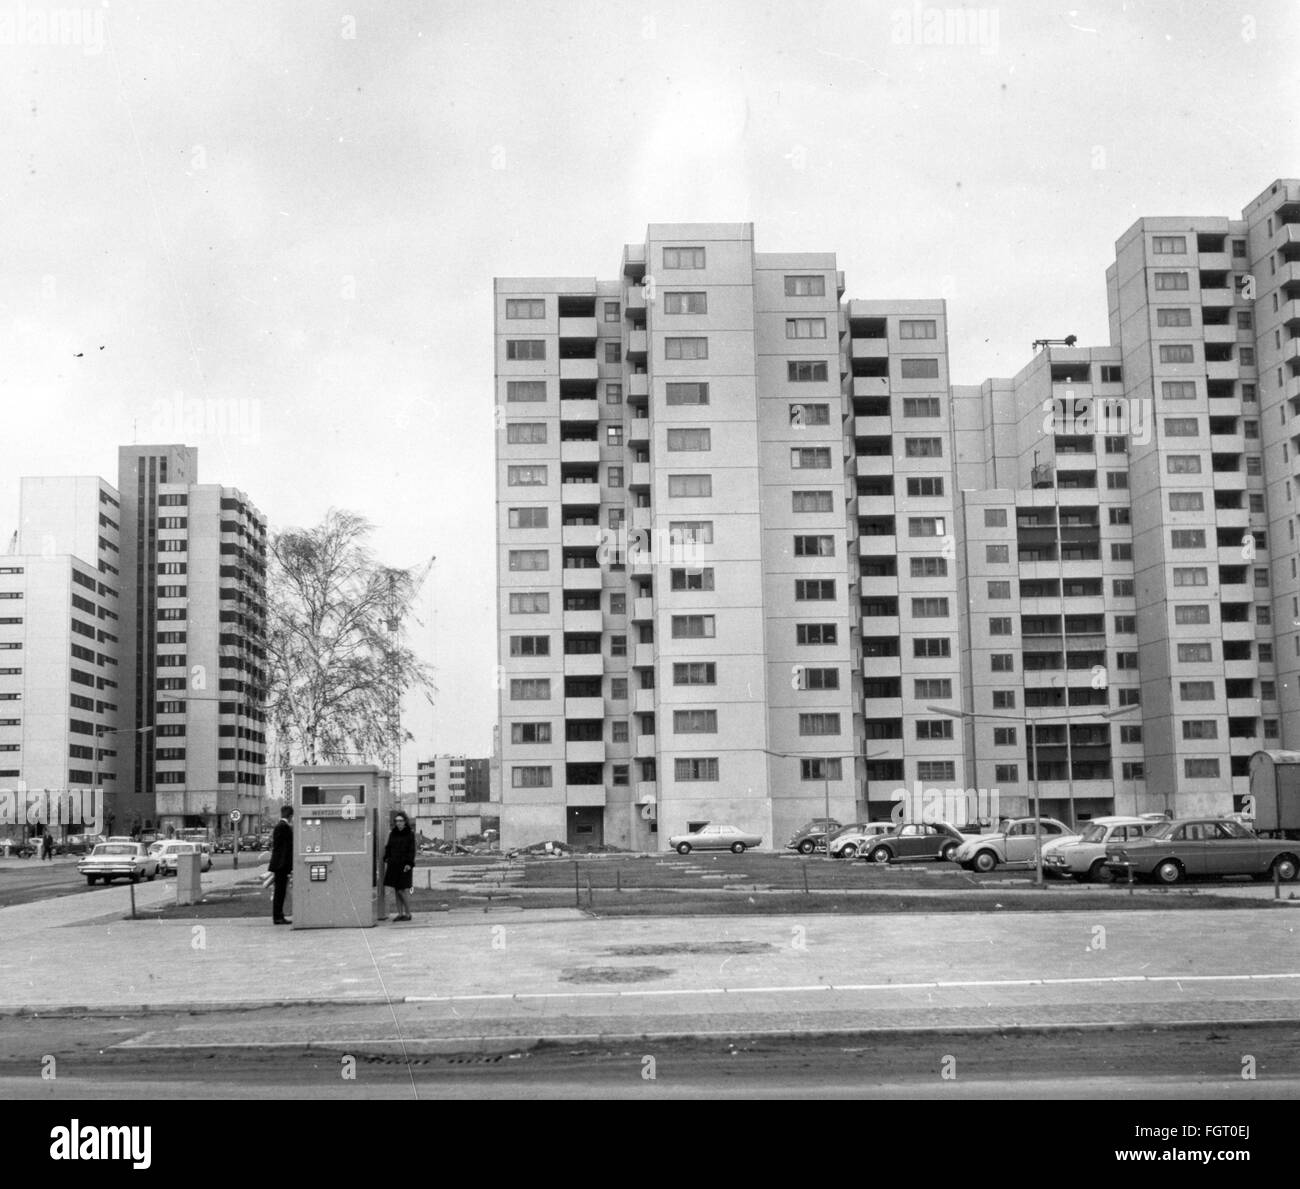 geography / travel,Germany,Berlin,district,Maerkisches Viertel,dwellings,built between 1966 and 1968,exterior view,1969,architecture,development area,housing estate,new house,new building,new houses,new buildings,multi-storey building,high-rise building,buildings,house,houses,large residential subdivision,satellite town,satellite towns,people,cars,car,Volkswagen,VW beetle,Reinickendorf,West Berlin,Central Europe,1960s,60s,20th century,district,districts,home,dwelling,homes,dwellings,historic,historical,Maerkisches,Mär,Additional-Rights-Clearences-Not Available Stock Photo